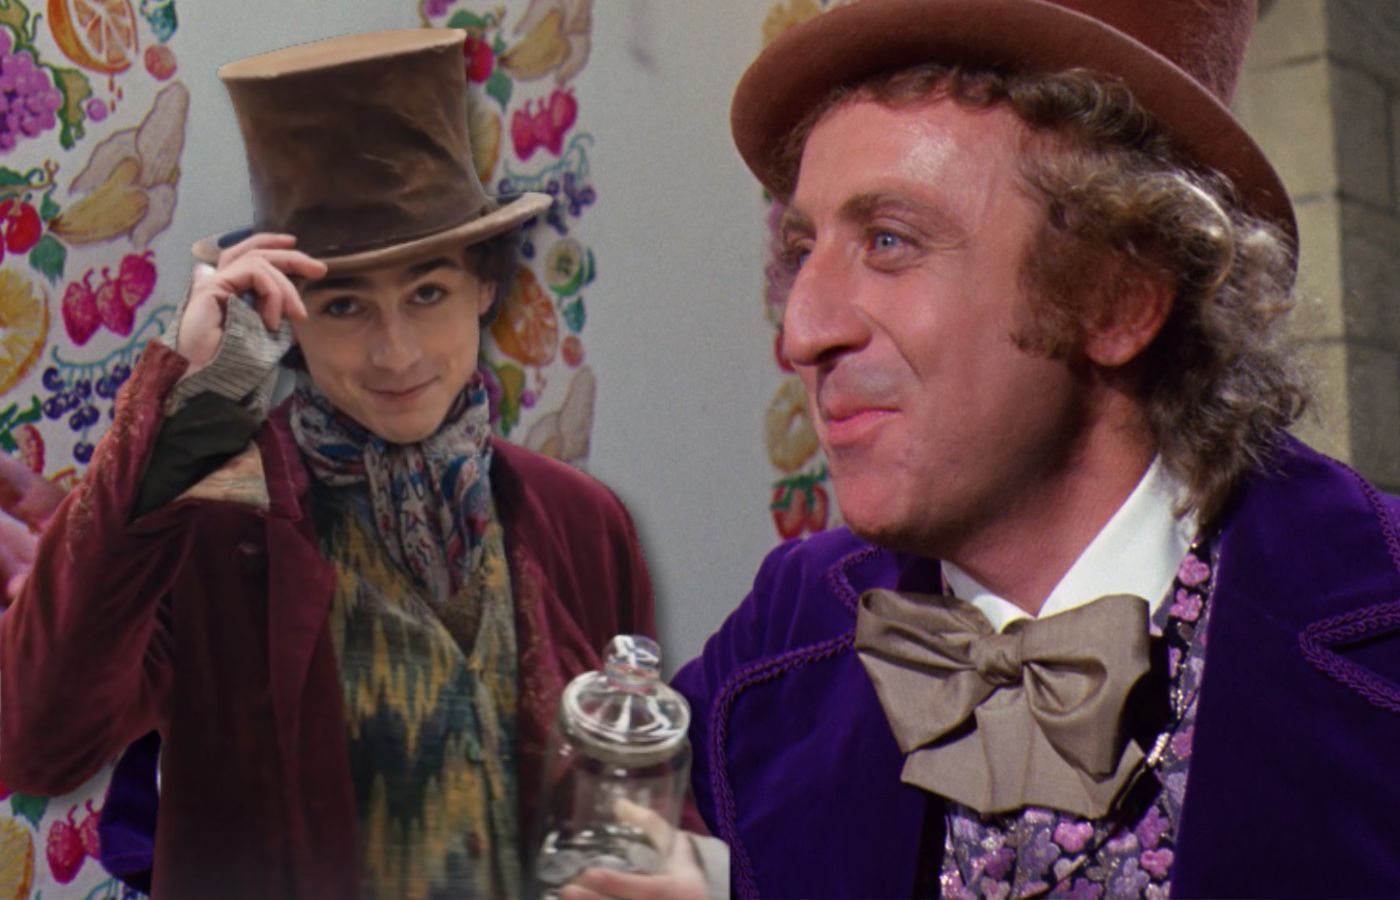 Willy Wonka Movie in the Works, Sets Release Date